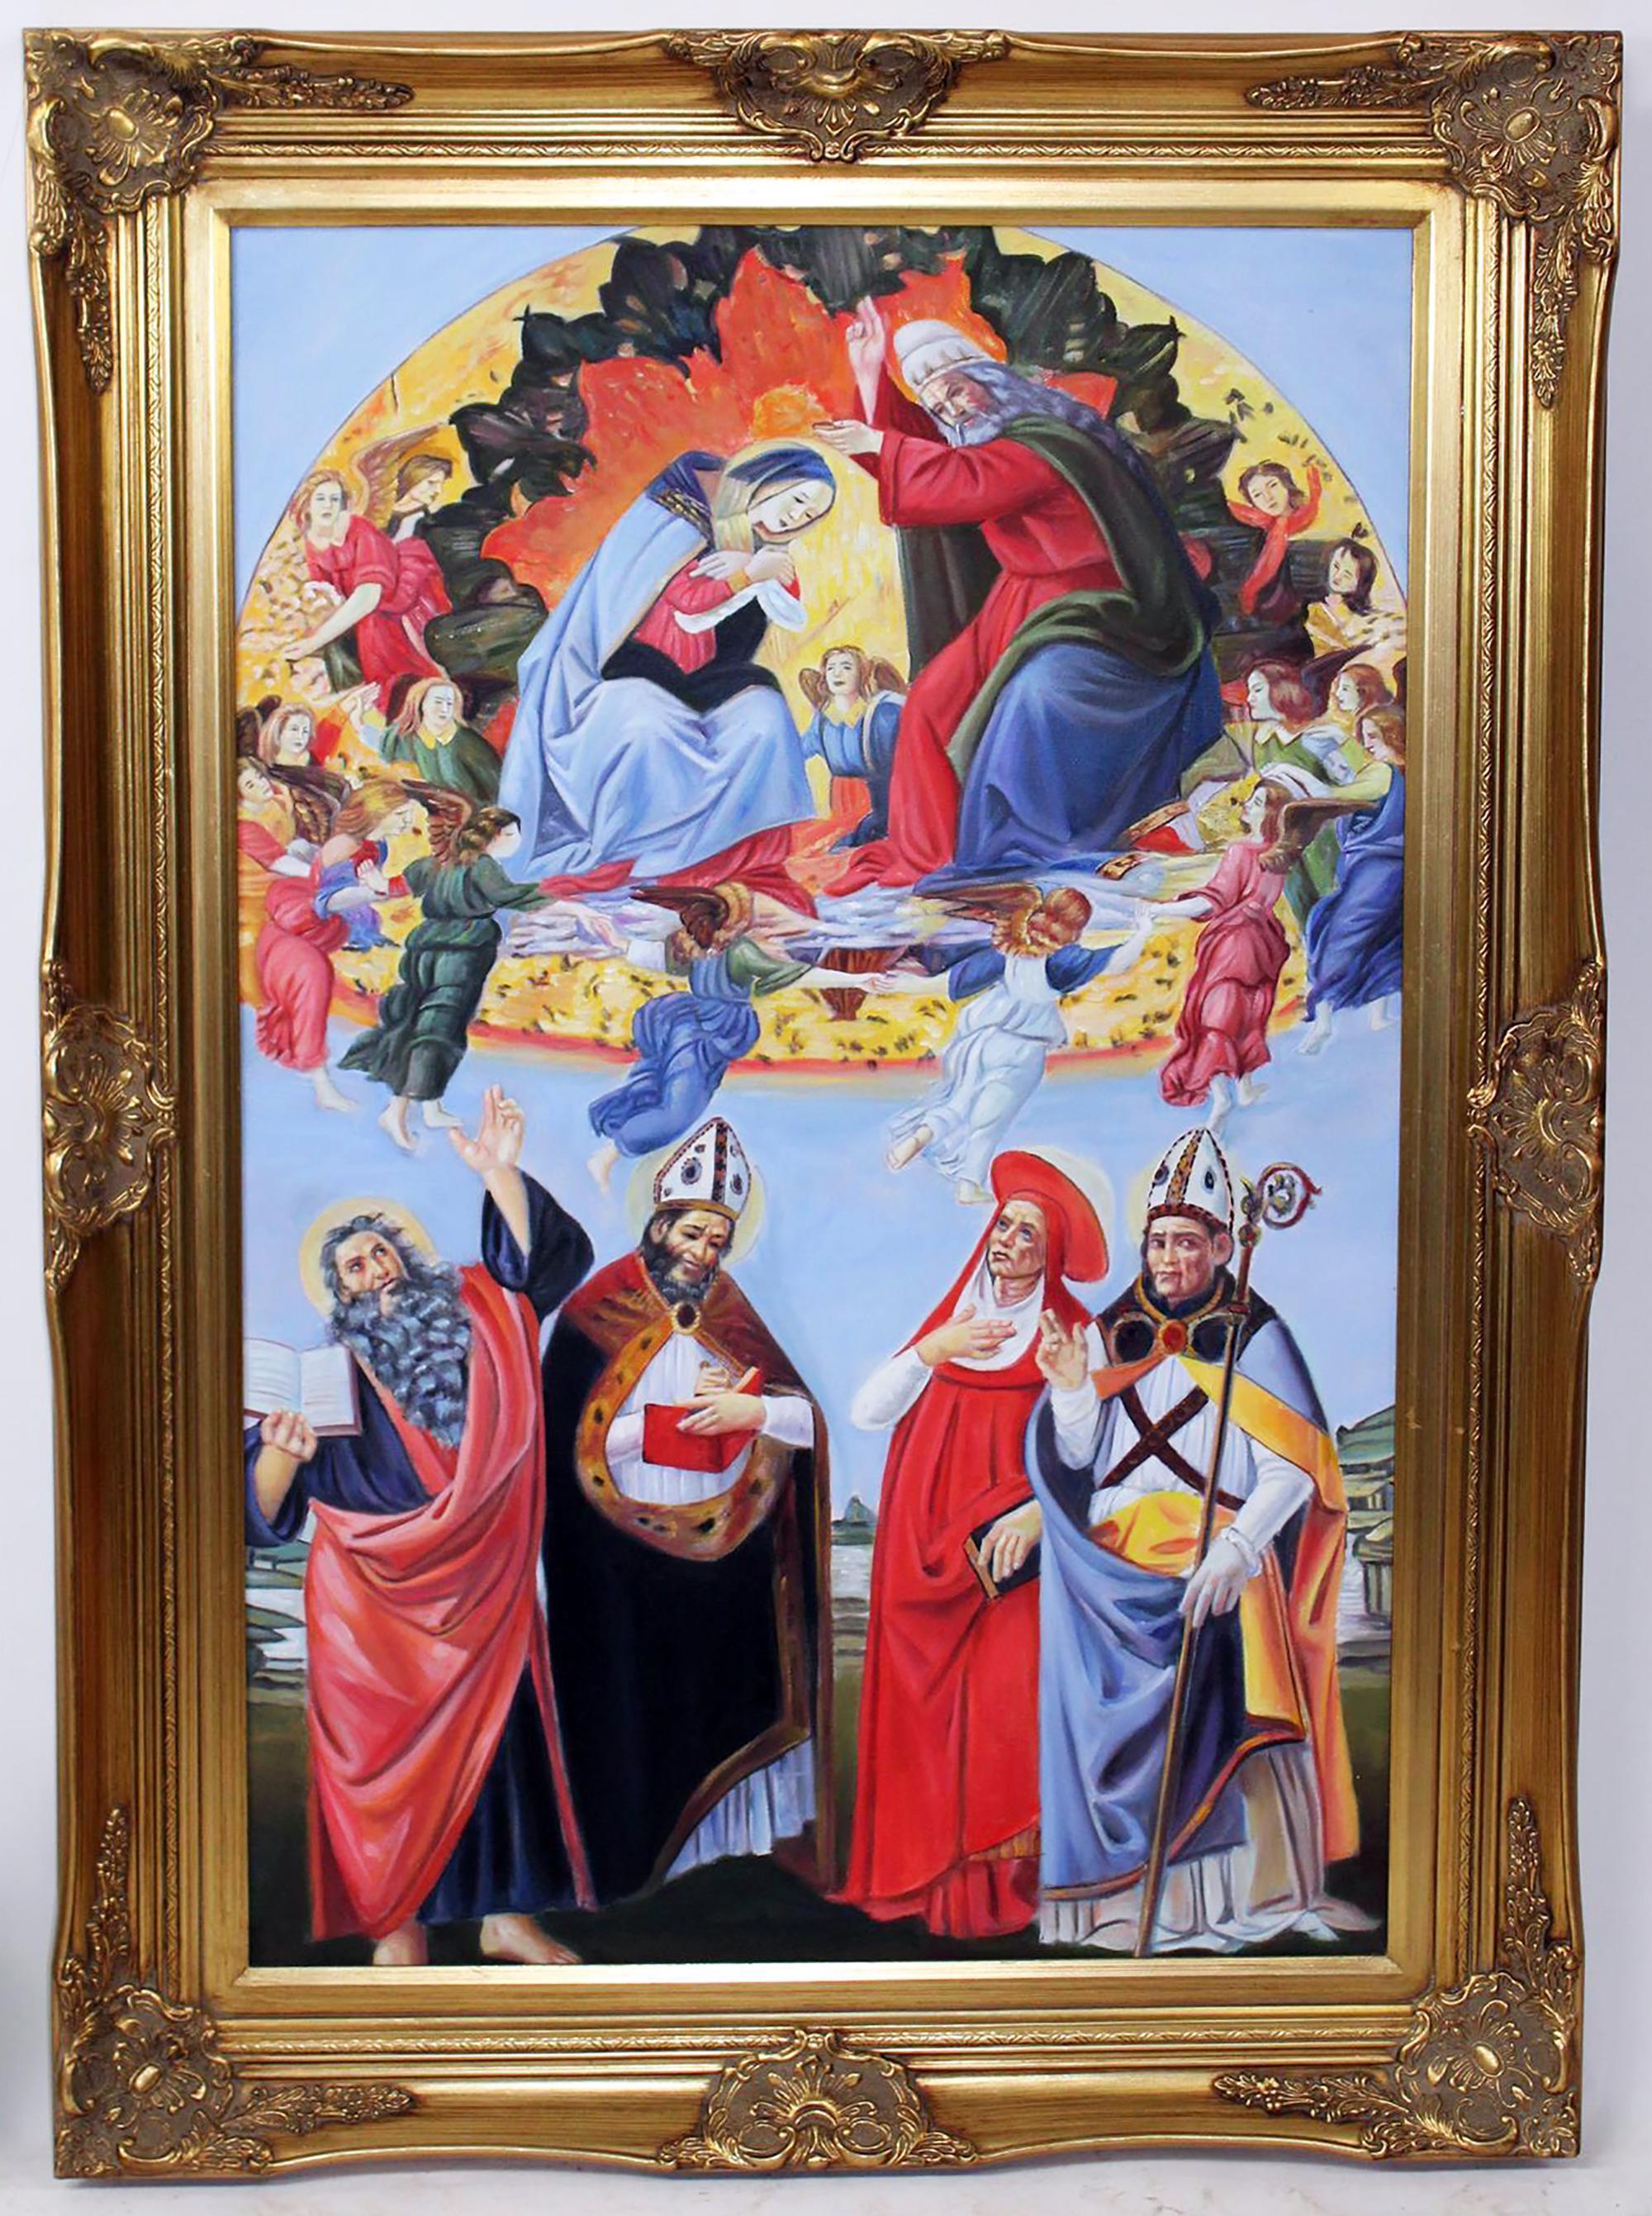 Unknown Figurative Painting - Large Portrait Oil Painting Depicting THE ASSUMPTION OF MARY